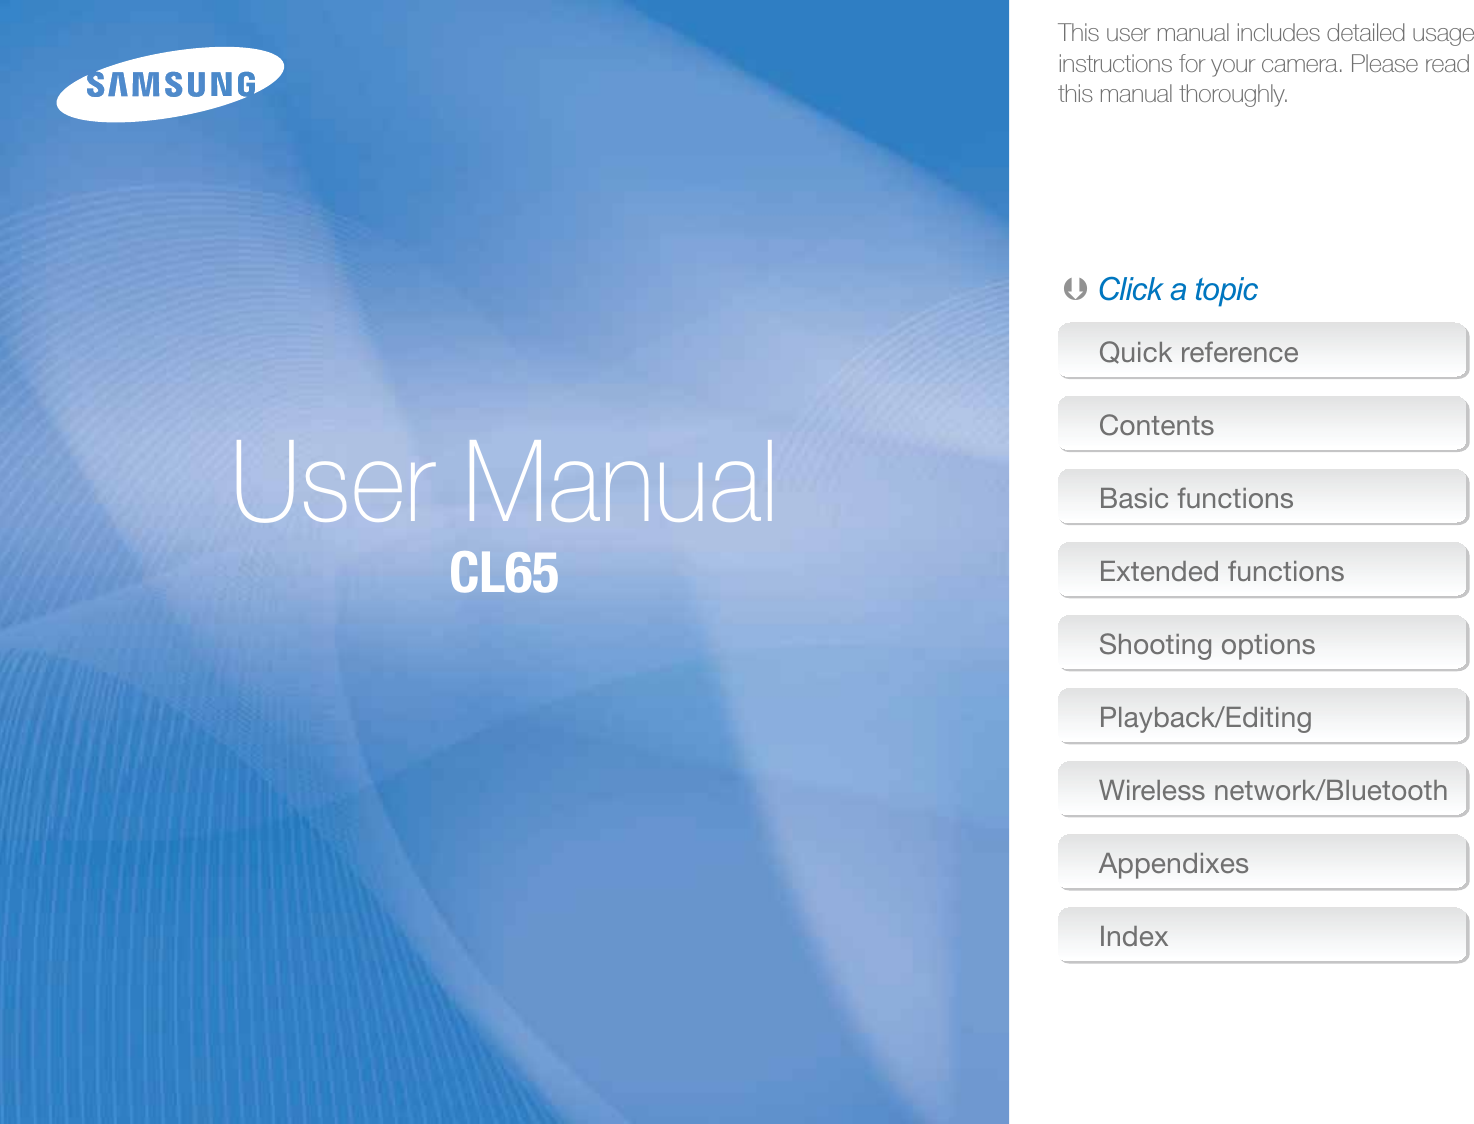 This user manual includes detailed usage instructions for your camera. Please read  this manual thoroughly.Ä Click a topic        User ManualCL65Quick referenceContentsBasic functionsExtended functionsShooting optionsPlayback/EditingWireless network/BluetoothAppendixesIndex